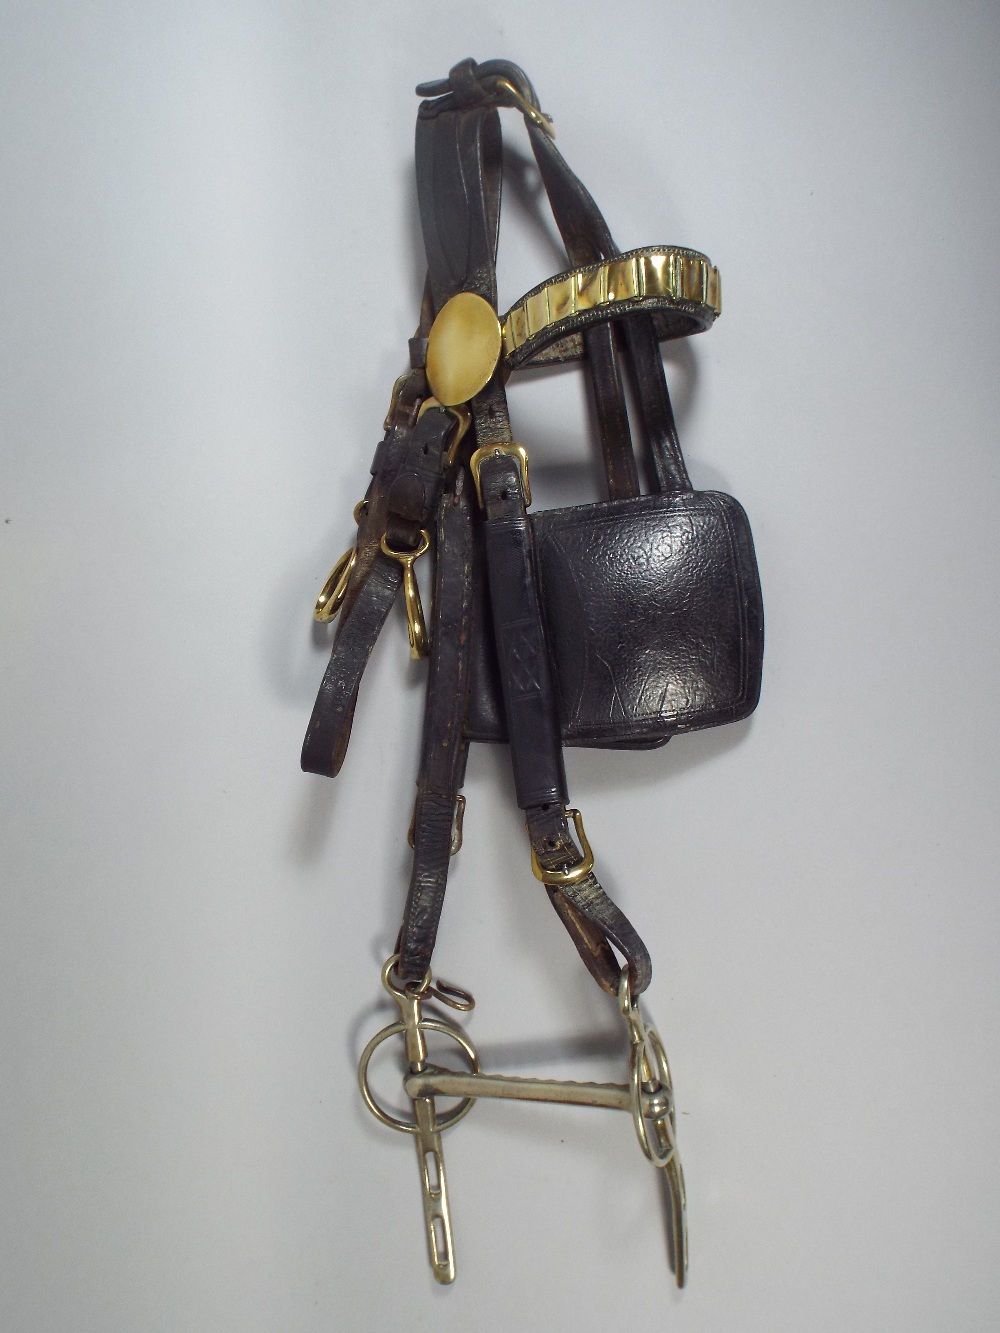 A Victorian Brass Mounted Leather Heavy Horse Bridle with Bit.